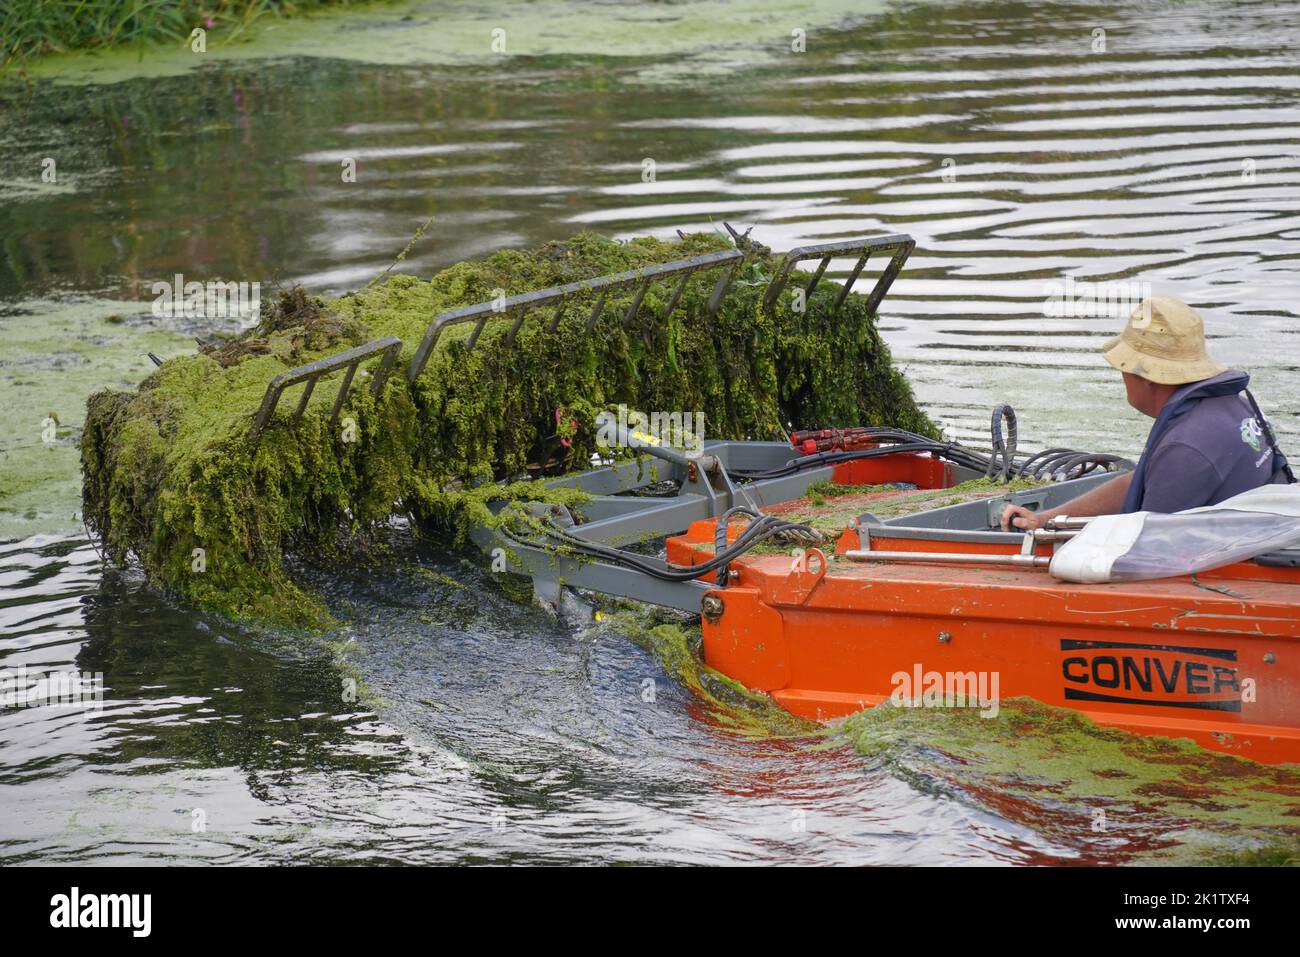 Mowing boats, Conver, weed, grass, plant growth, embankments, waterways, rivers, cleaning, debris removal, mechanical arm, overgrowth, duck weed, silt Stock Photo